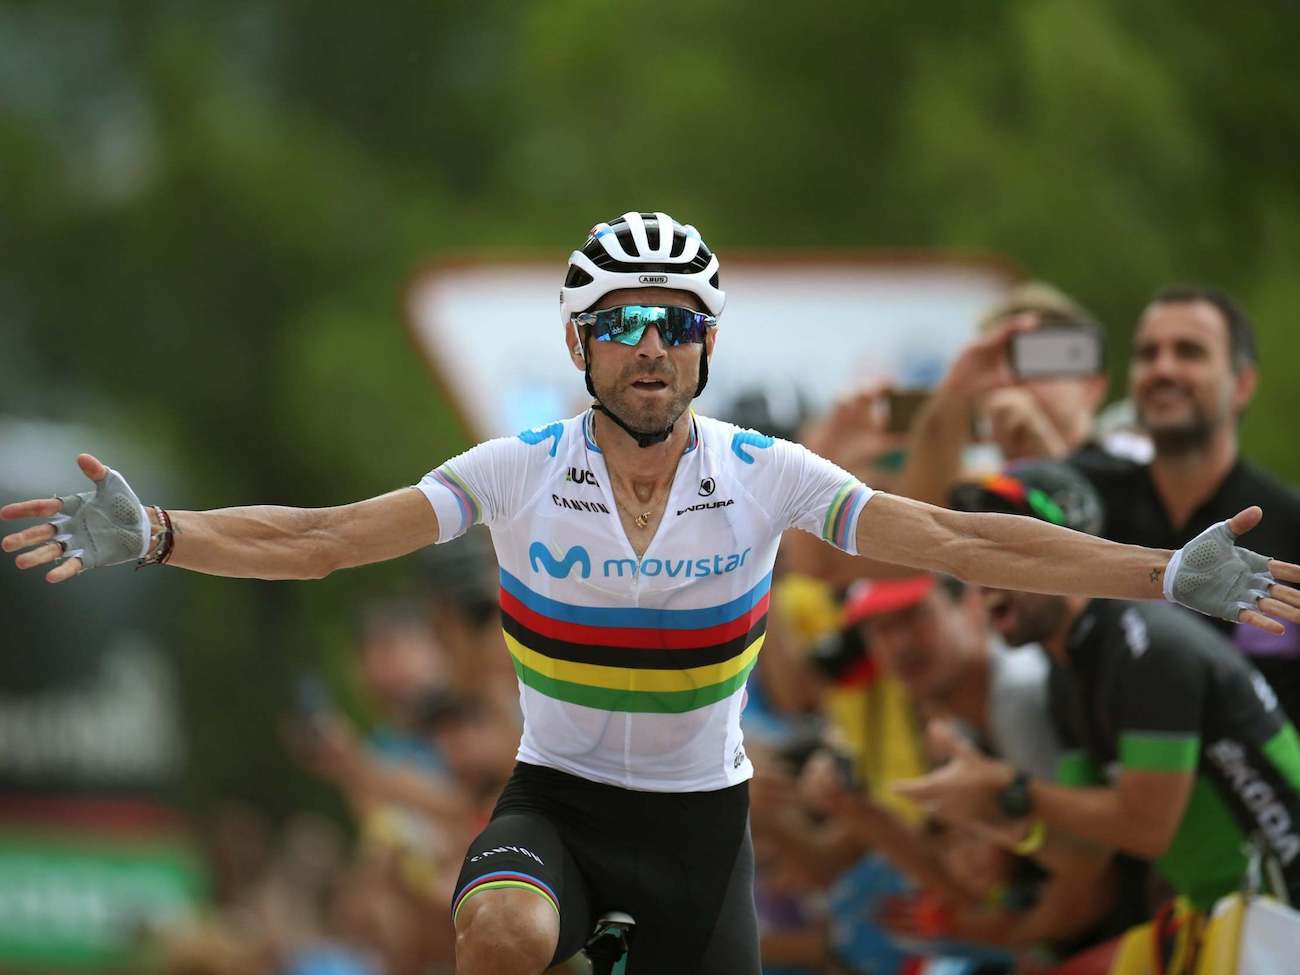 CapoVelo.com - Love Him or Hate Him, Alejandro Valverde Is the Best ...